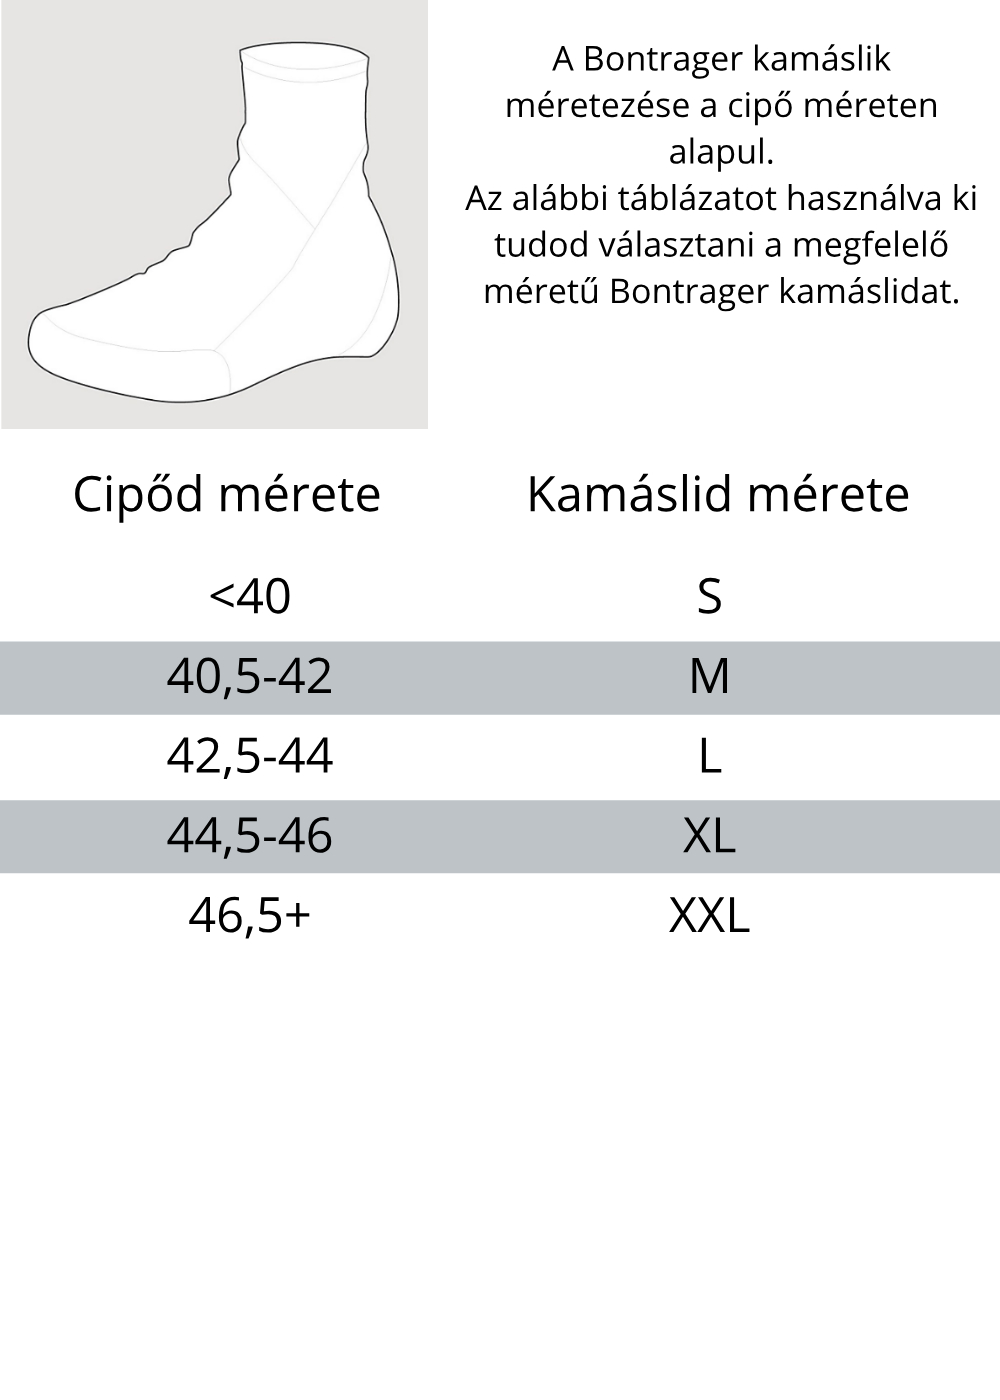 Product size